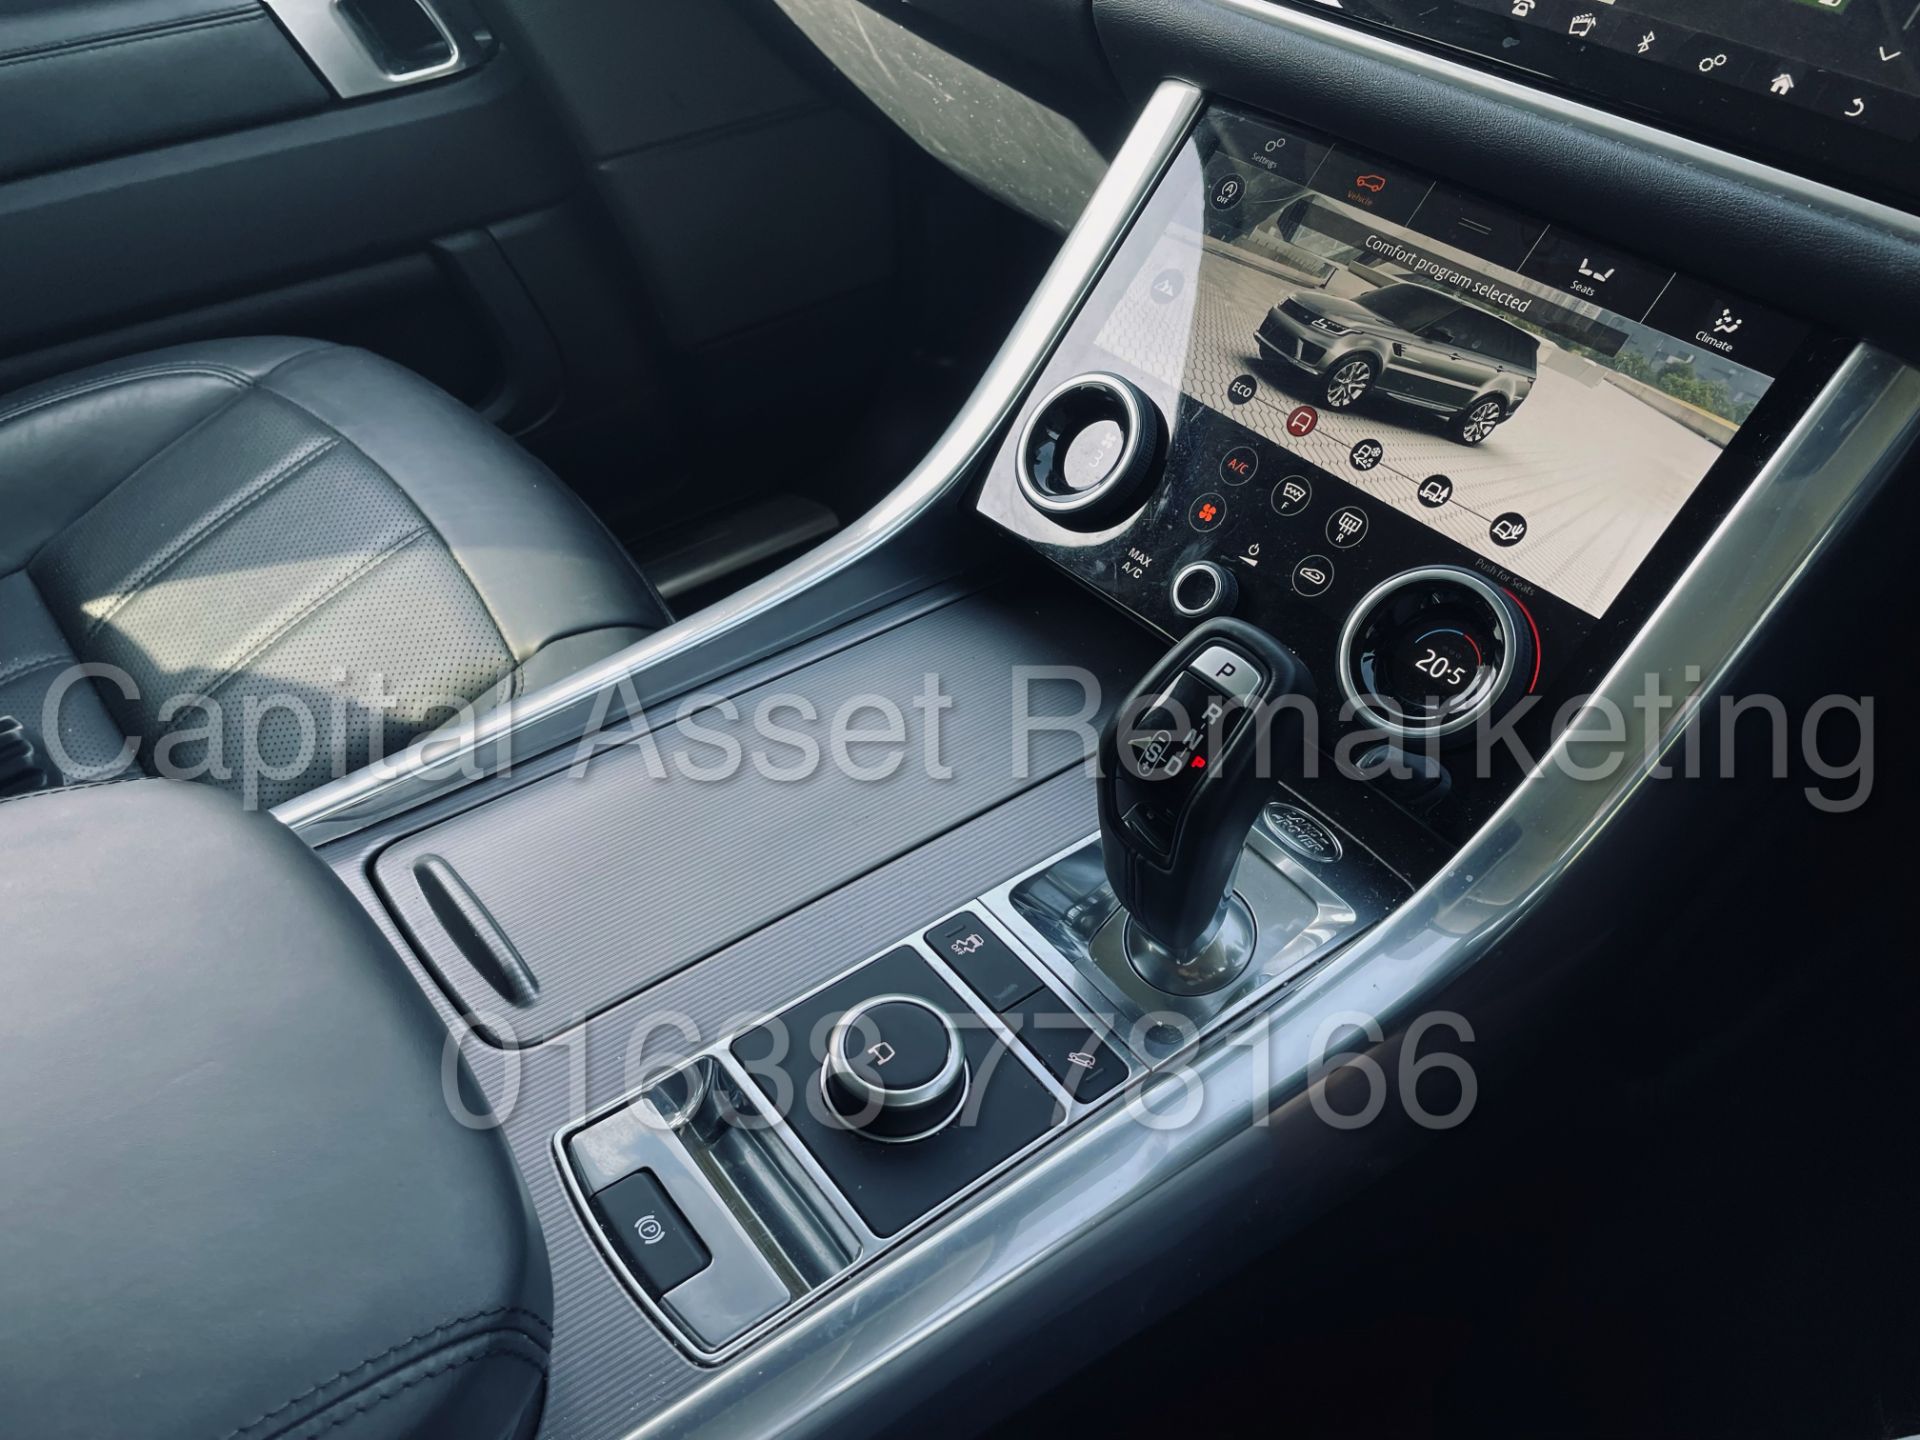 (On Sale) RANGE ROVER SPORT *HSE EDITION* SUV (2018 - NEW MODEL) '8 SPEED AUTO - LEATHER - NAV' - Image 51 of 58